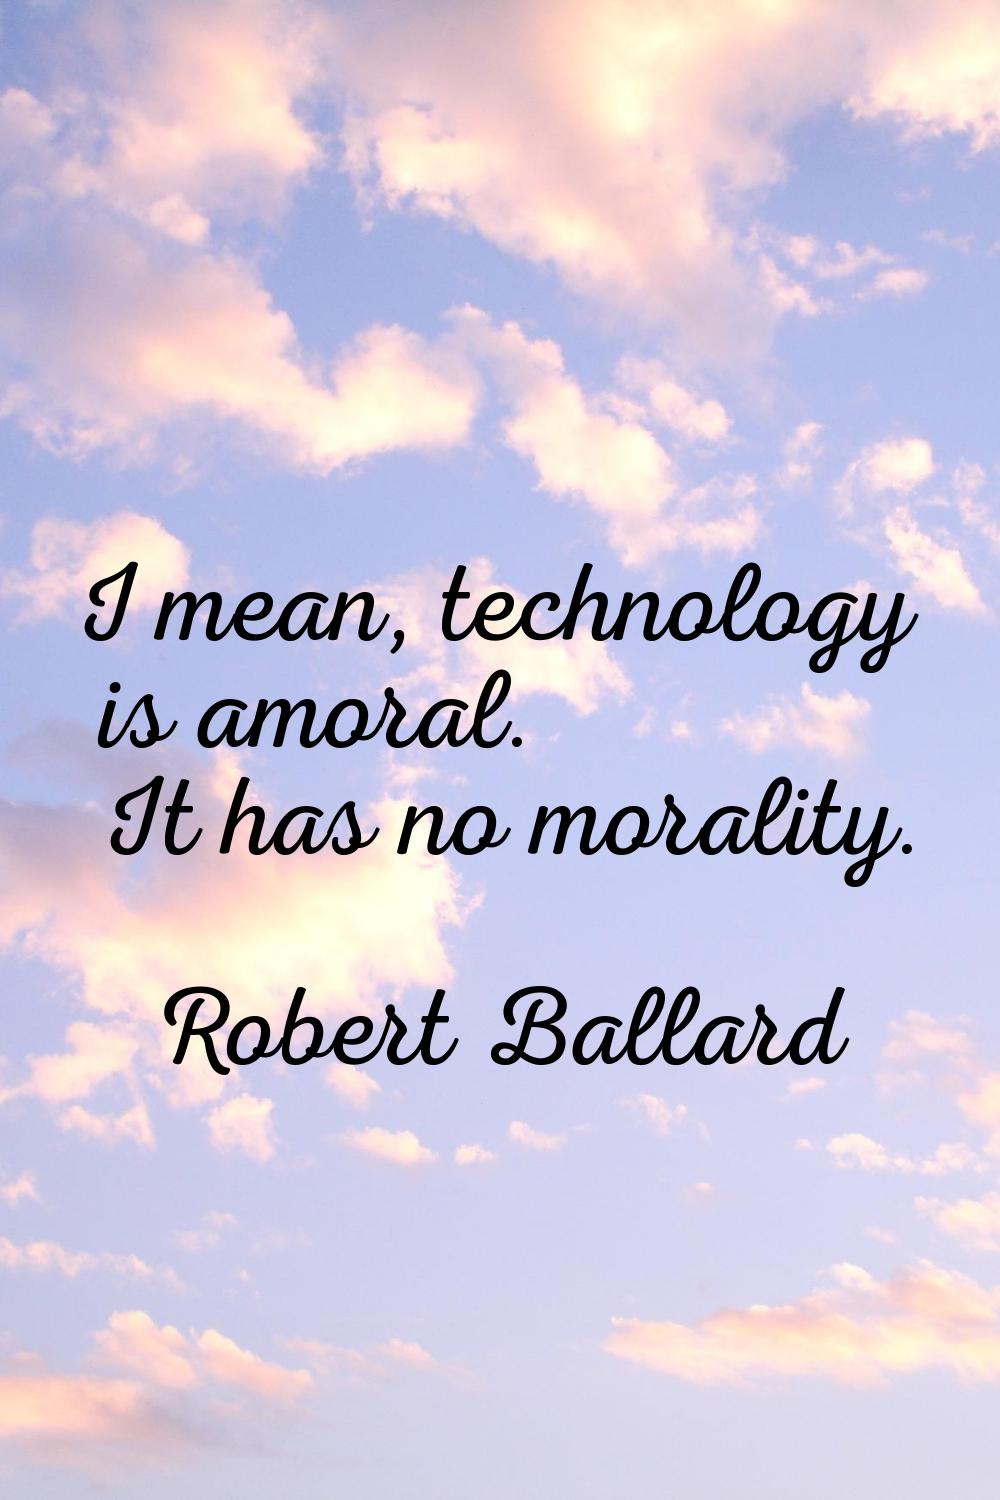 I mean, technology is amoral. It has no morality.